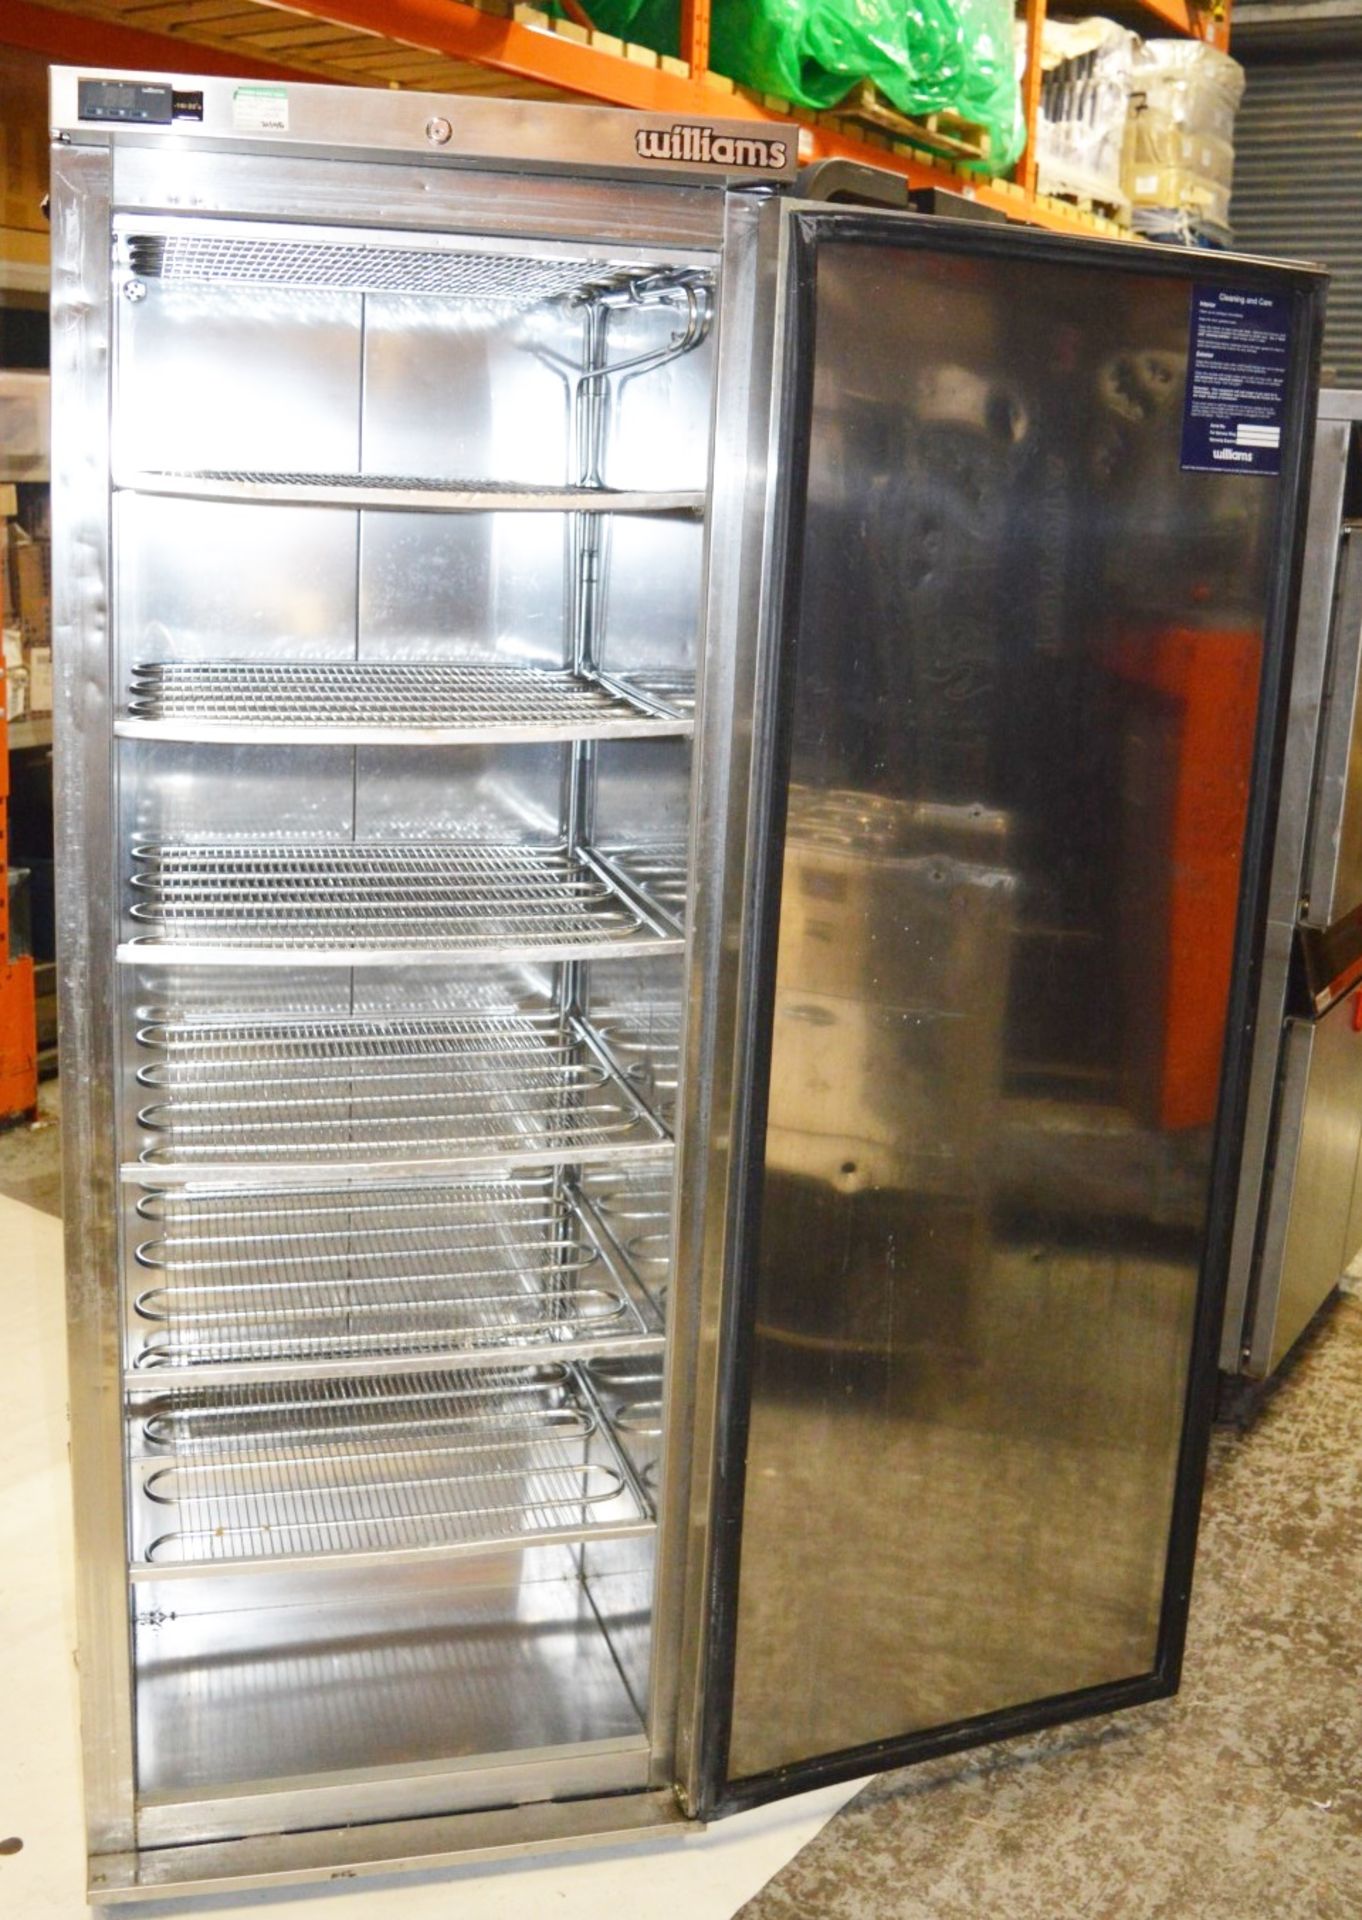 1 x Williams Upright Stainless Steel Commercial Freezer - Model LA400SS - CL290 - Ref J985 - H177 - Image 6 of 6